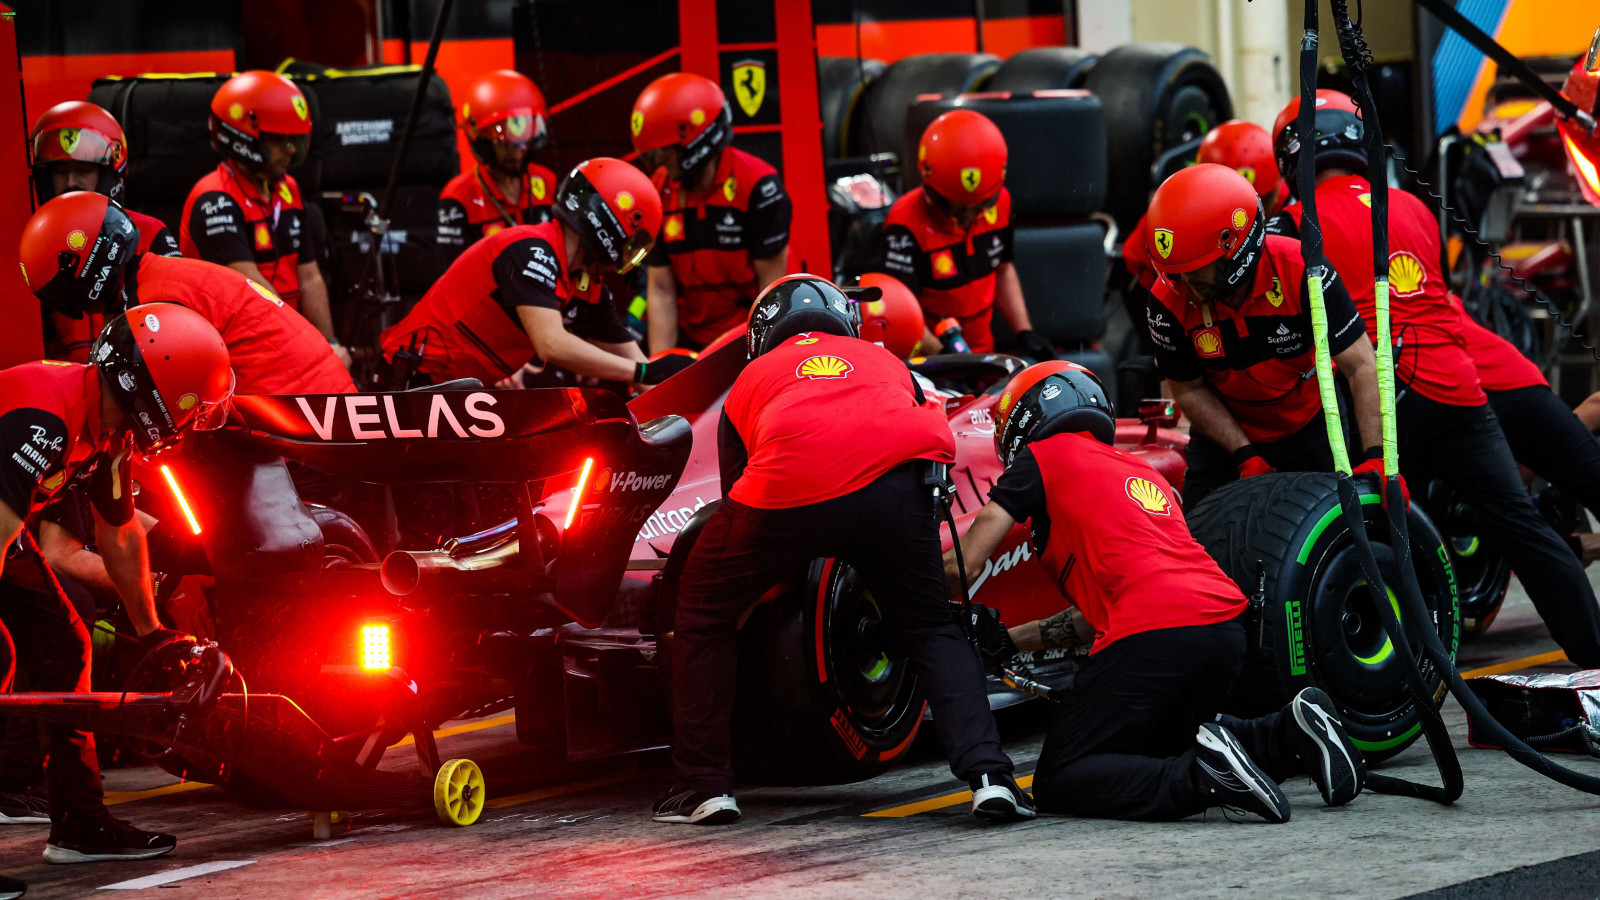 Charles Leclerc pits to swap from intermediate tyres to slicks on his Ferrari. Brazil November 2022